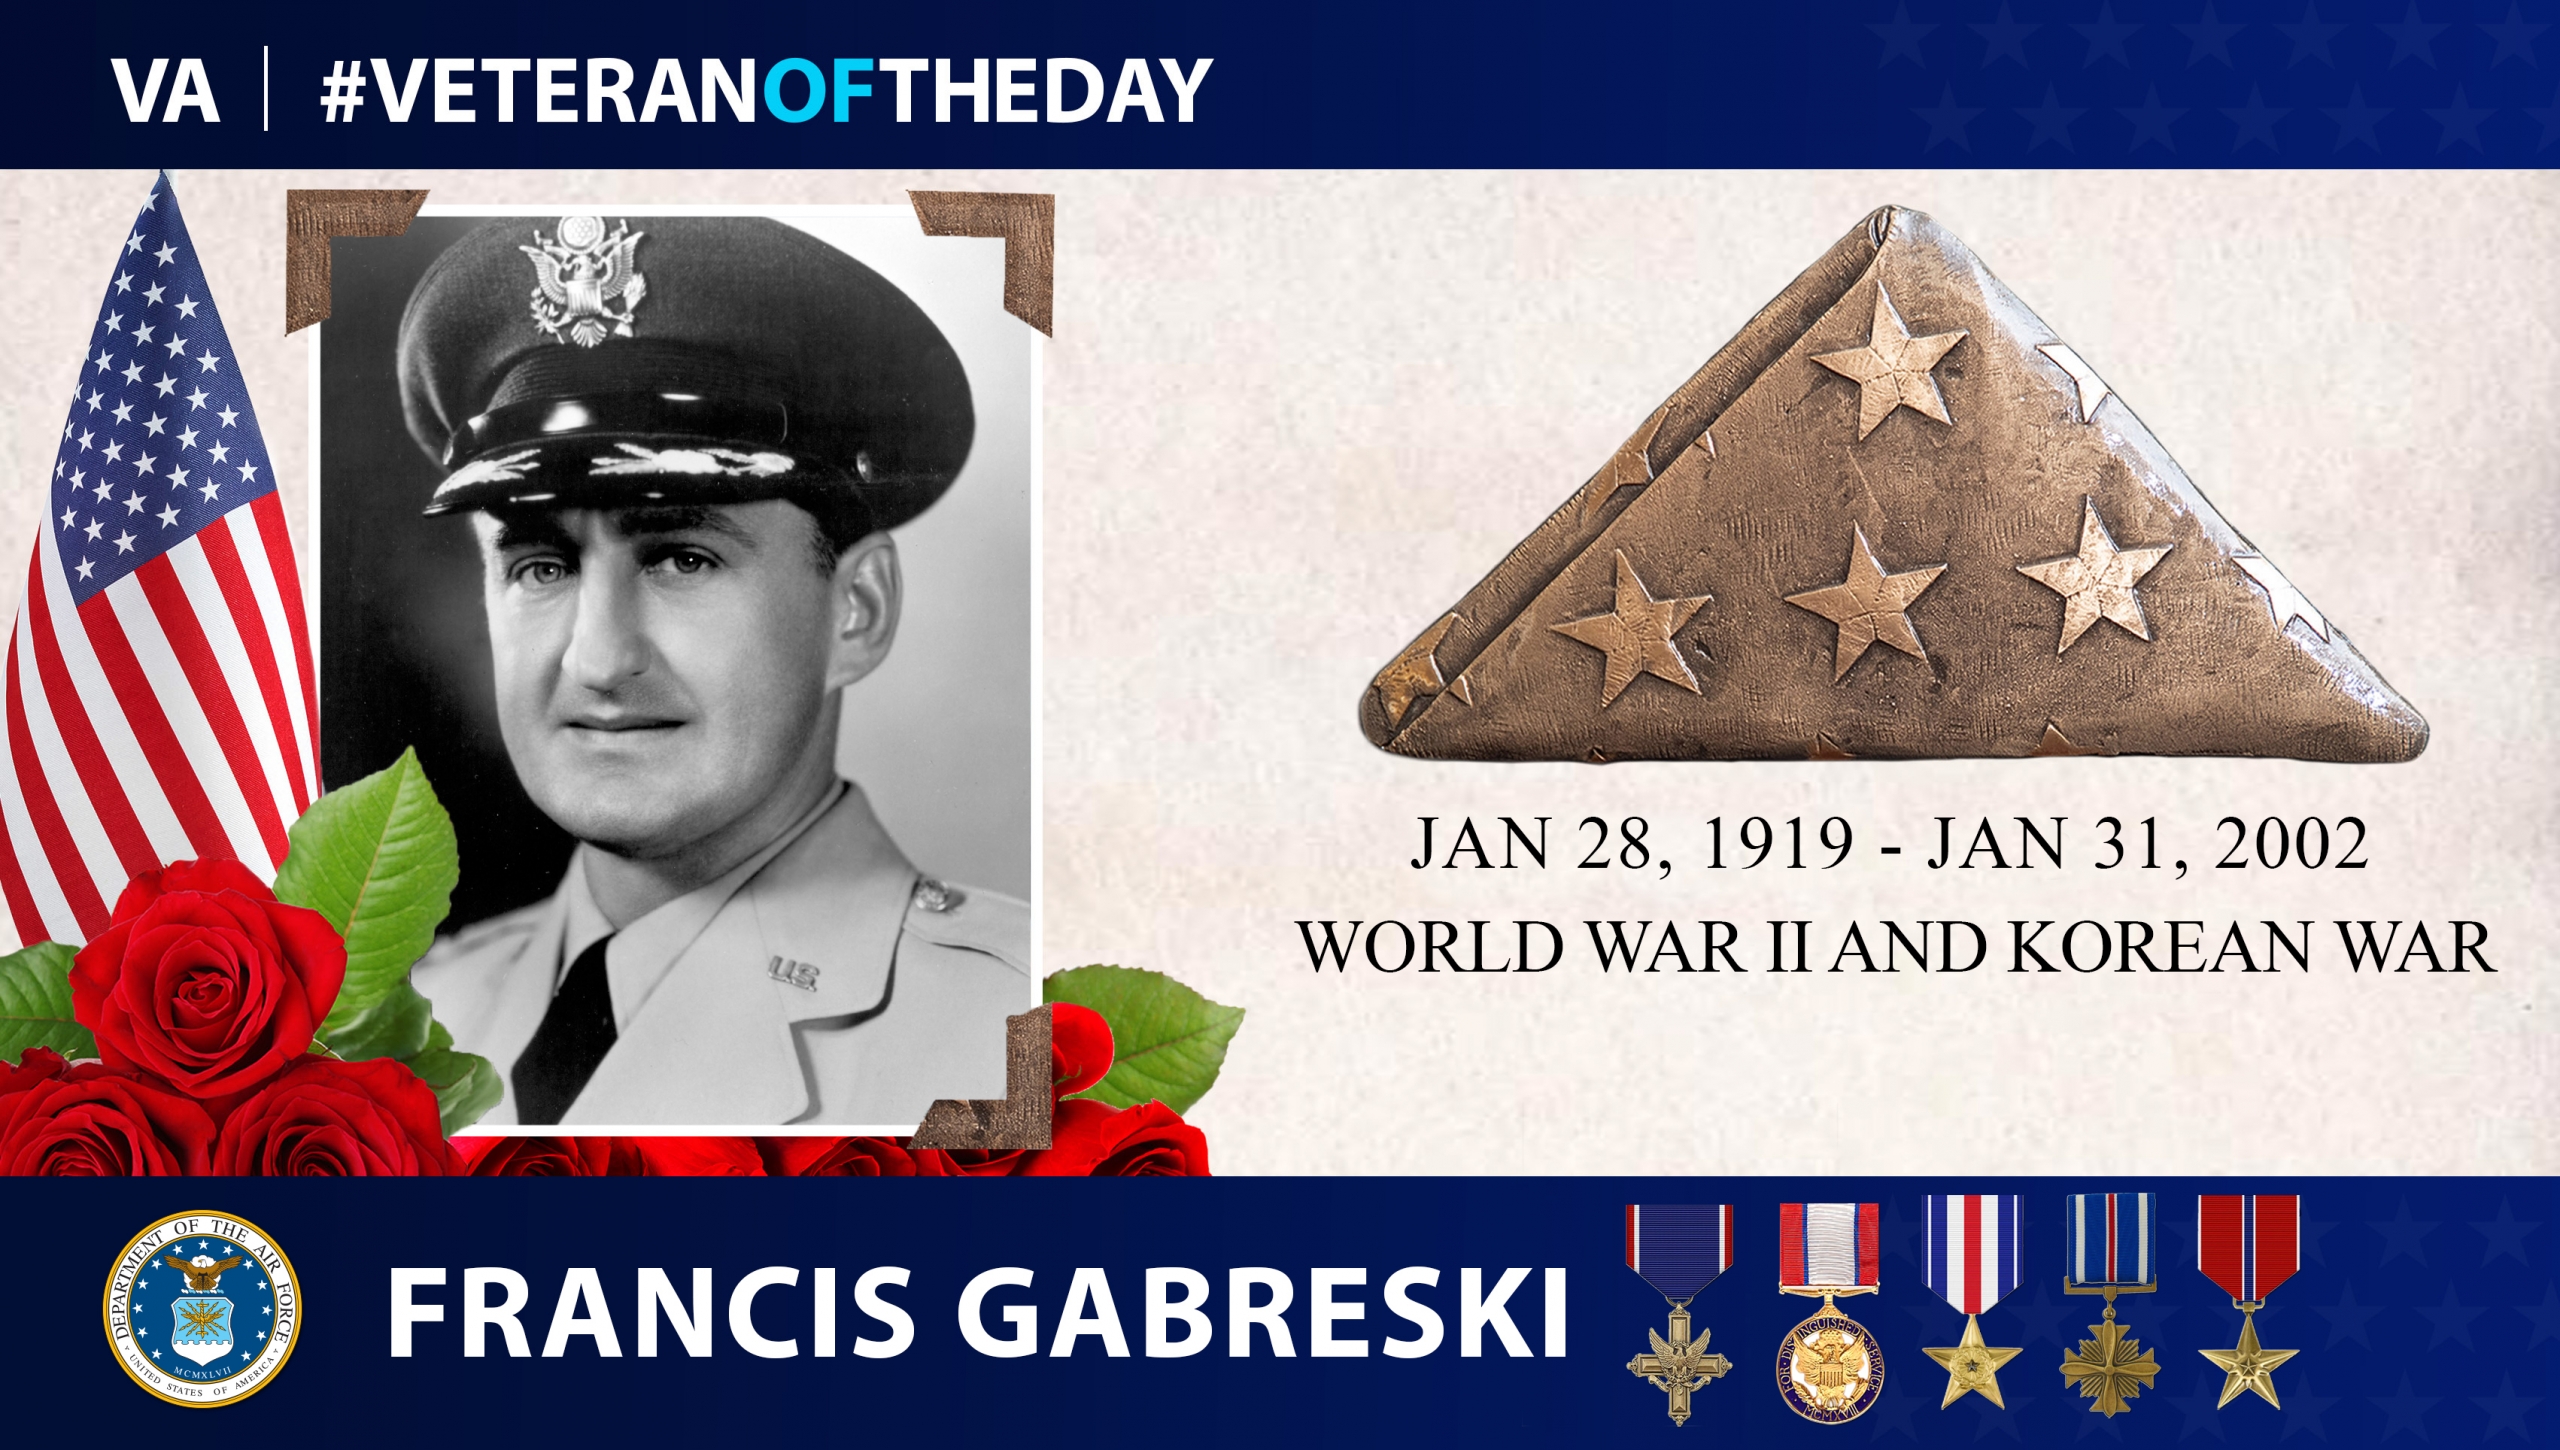 Army Air Corps Veteran Francis S. “Gabby” Gabreski is today’s Veteran of the Day.